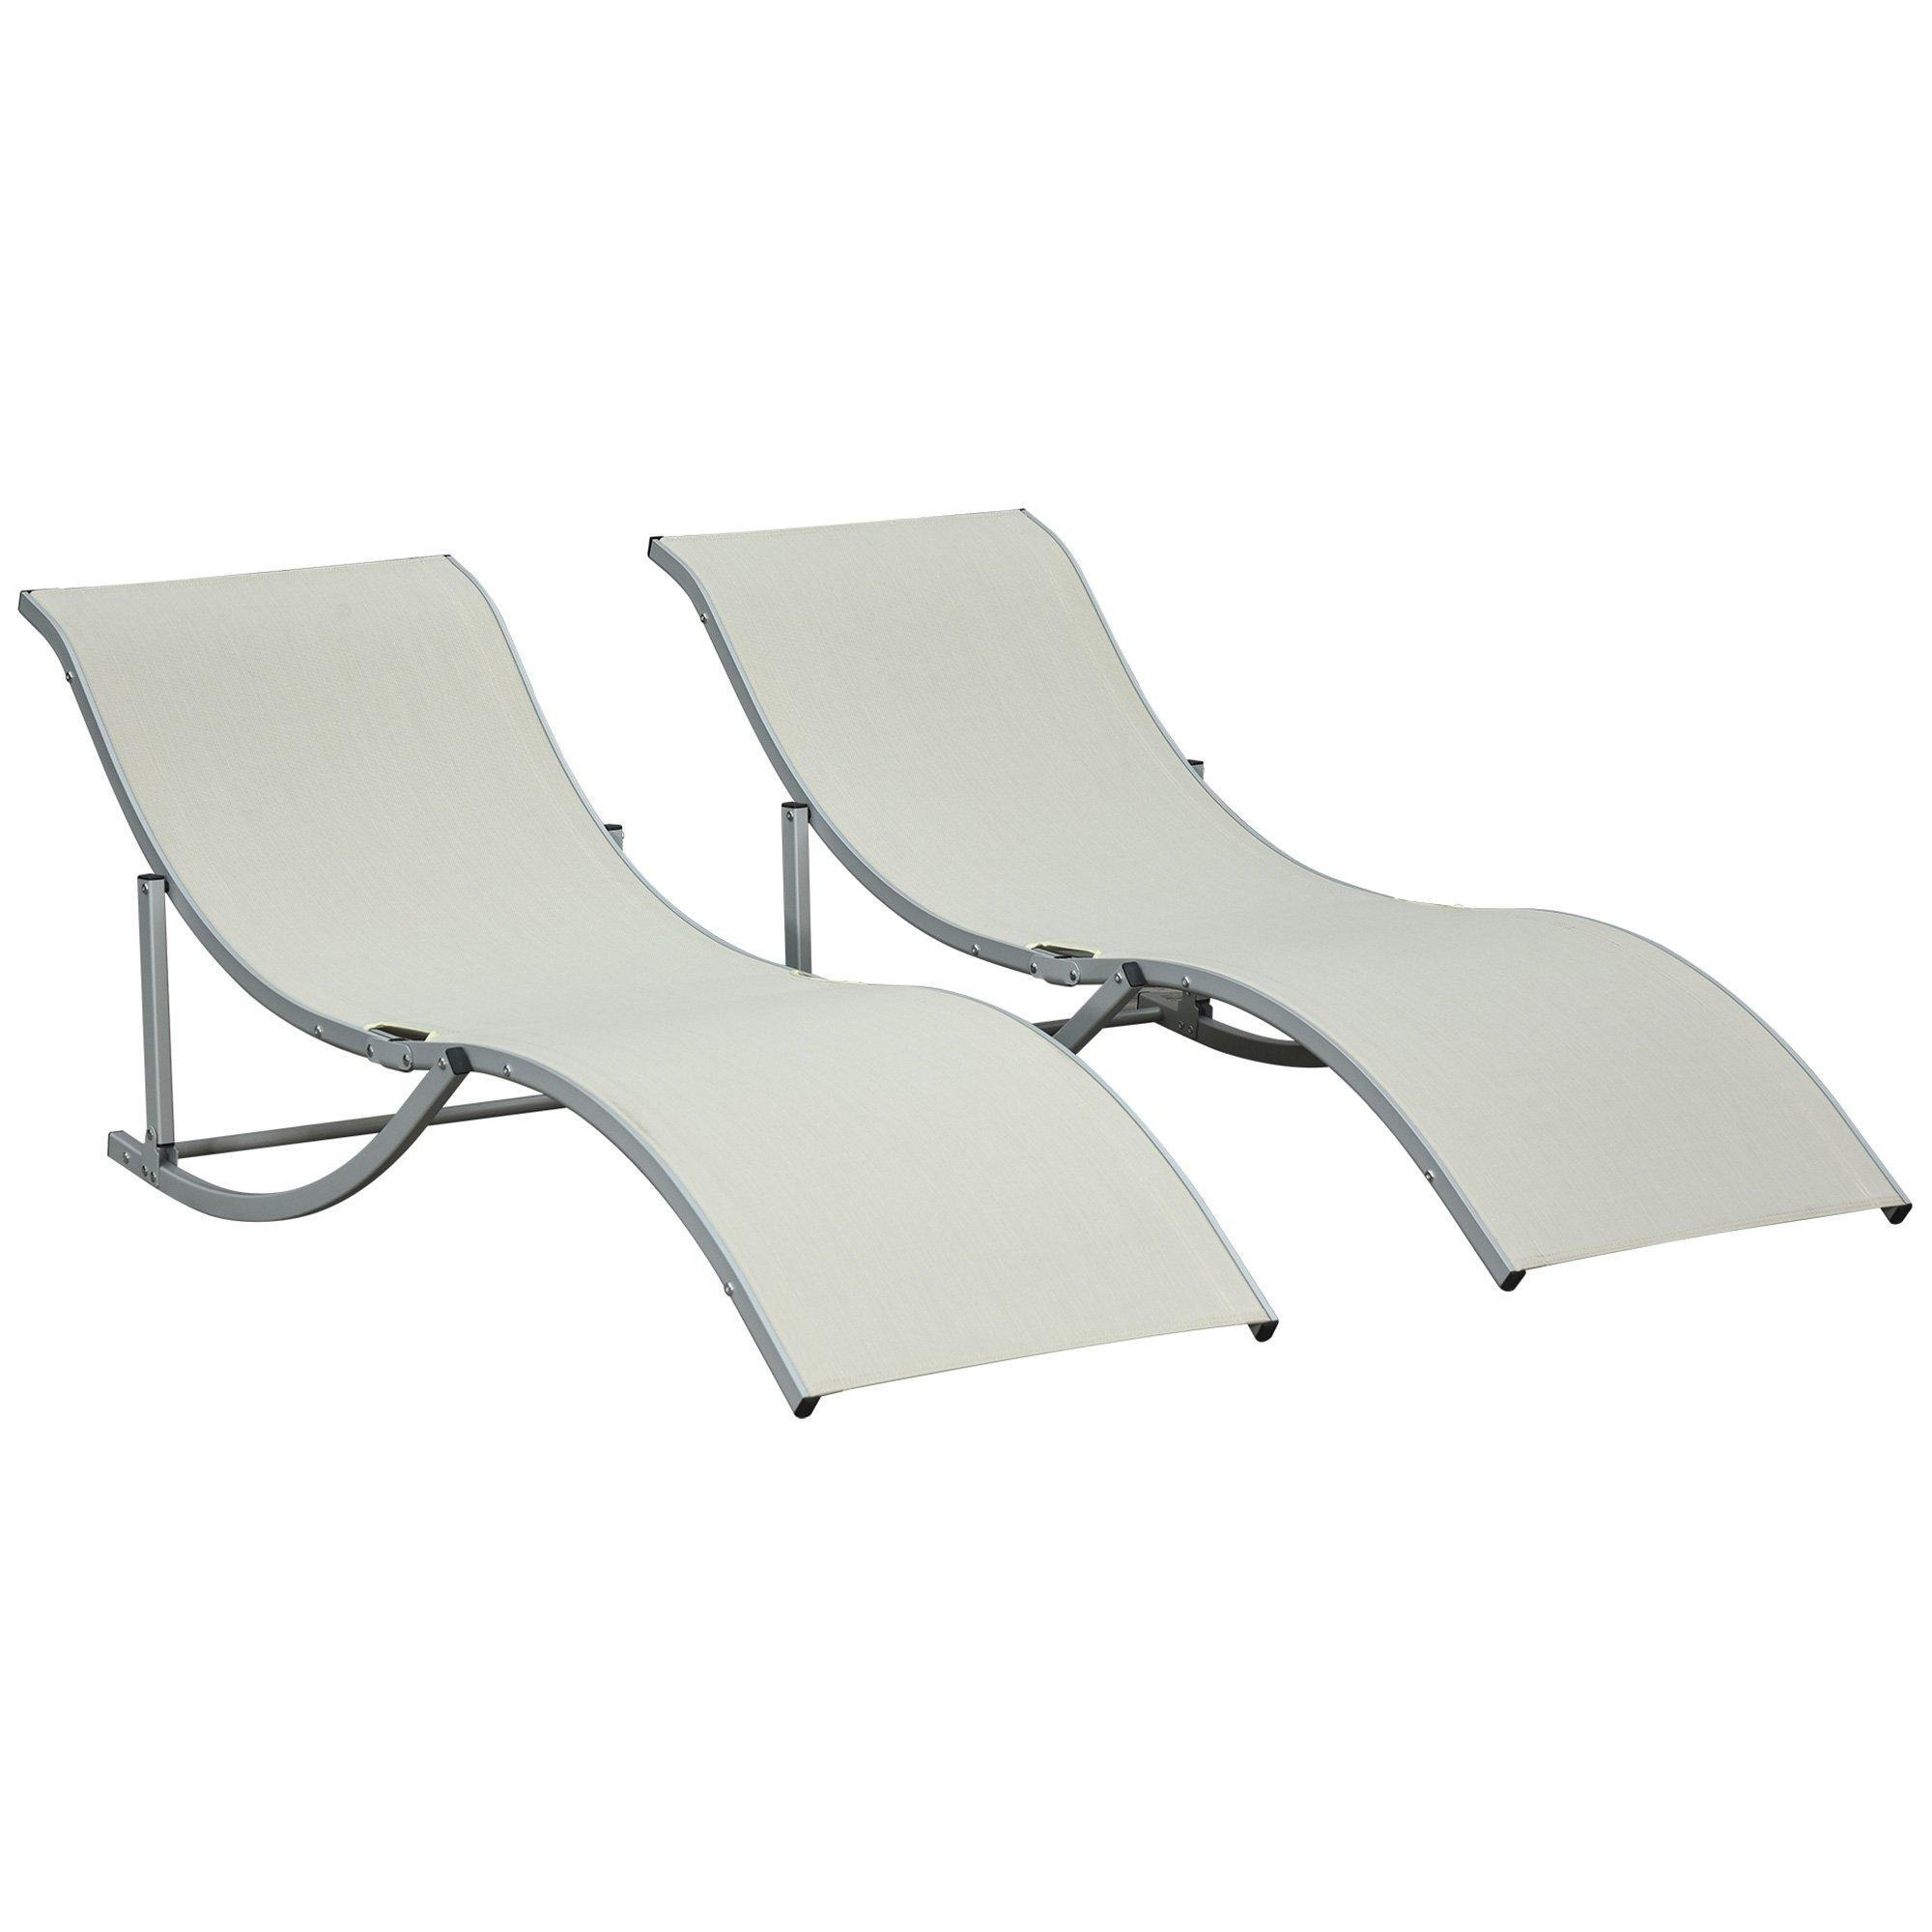 2pcs S-shaped Lounge Chair Sun Lounger Foldable Reclining Sleeping Bed - image 1